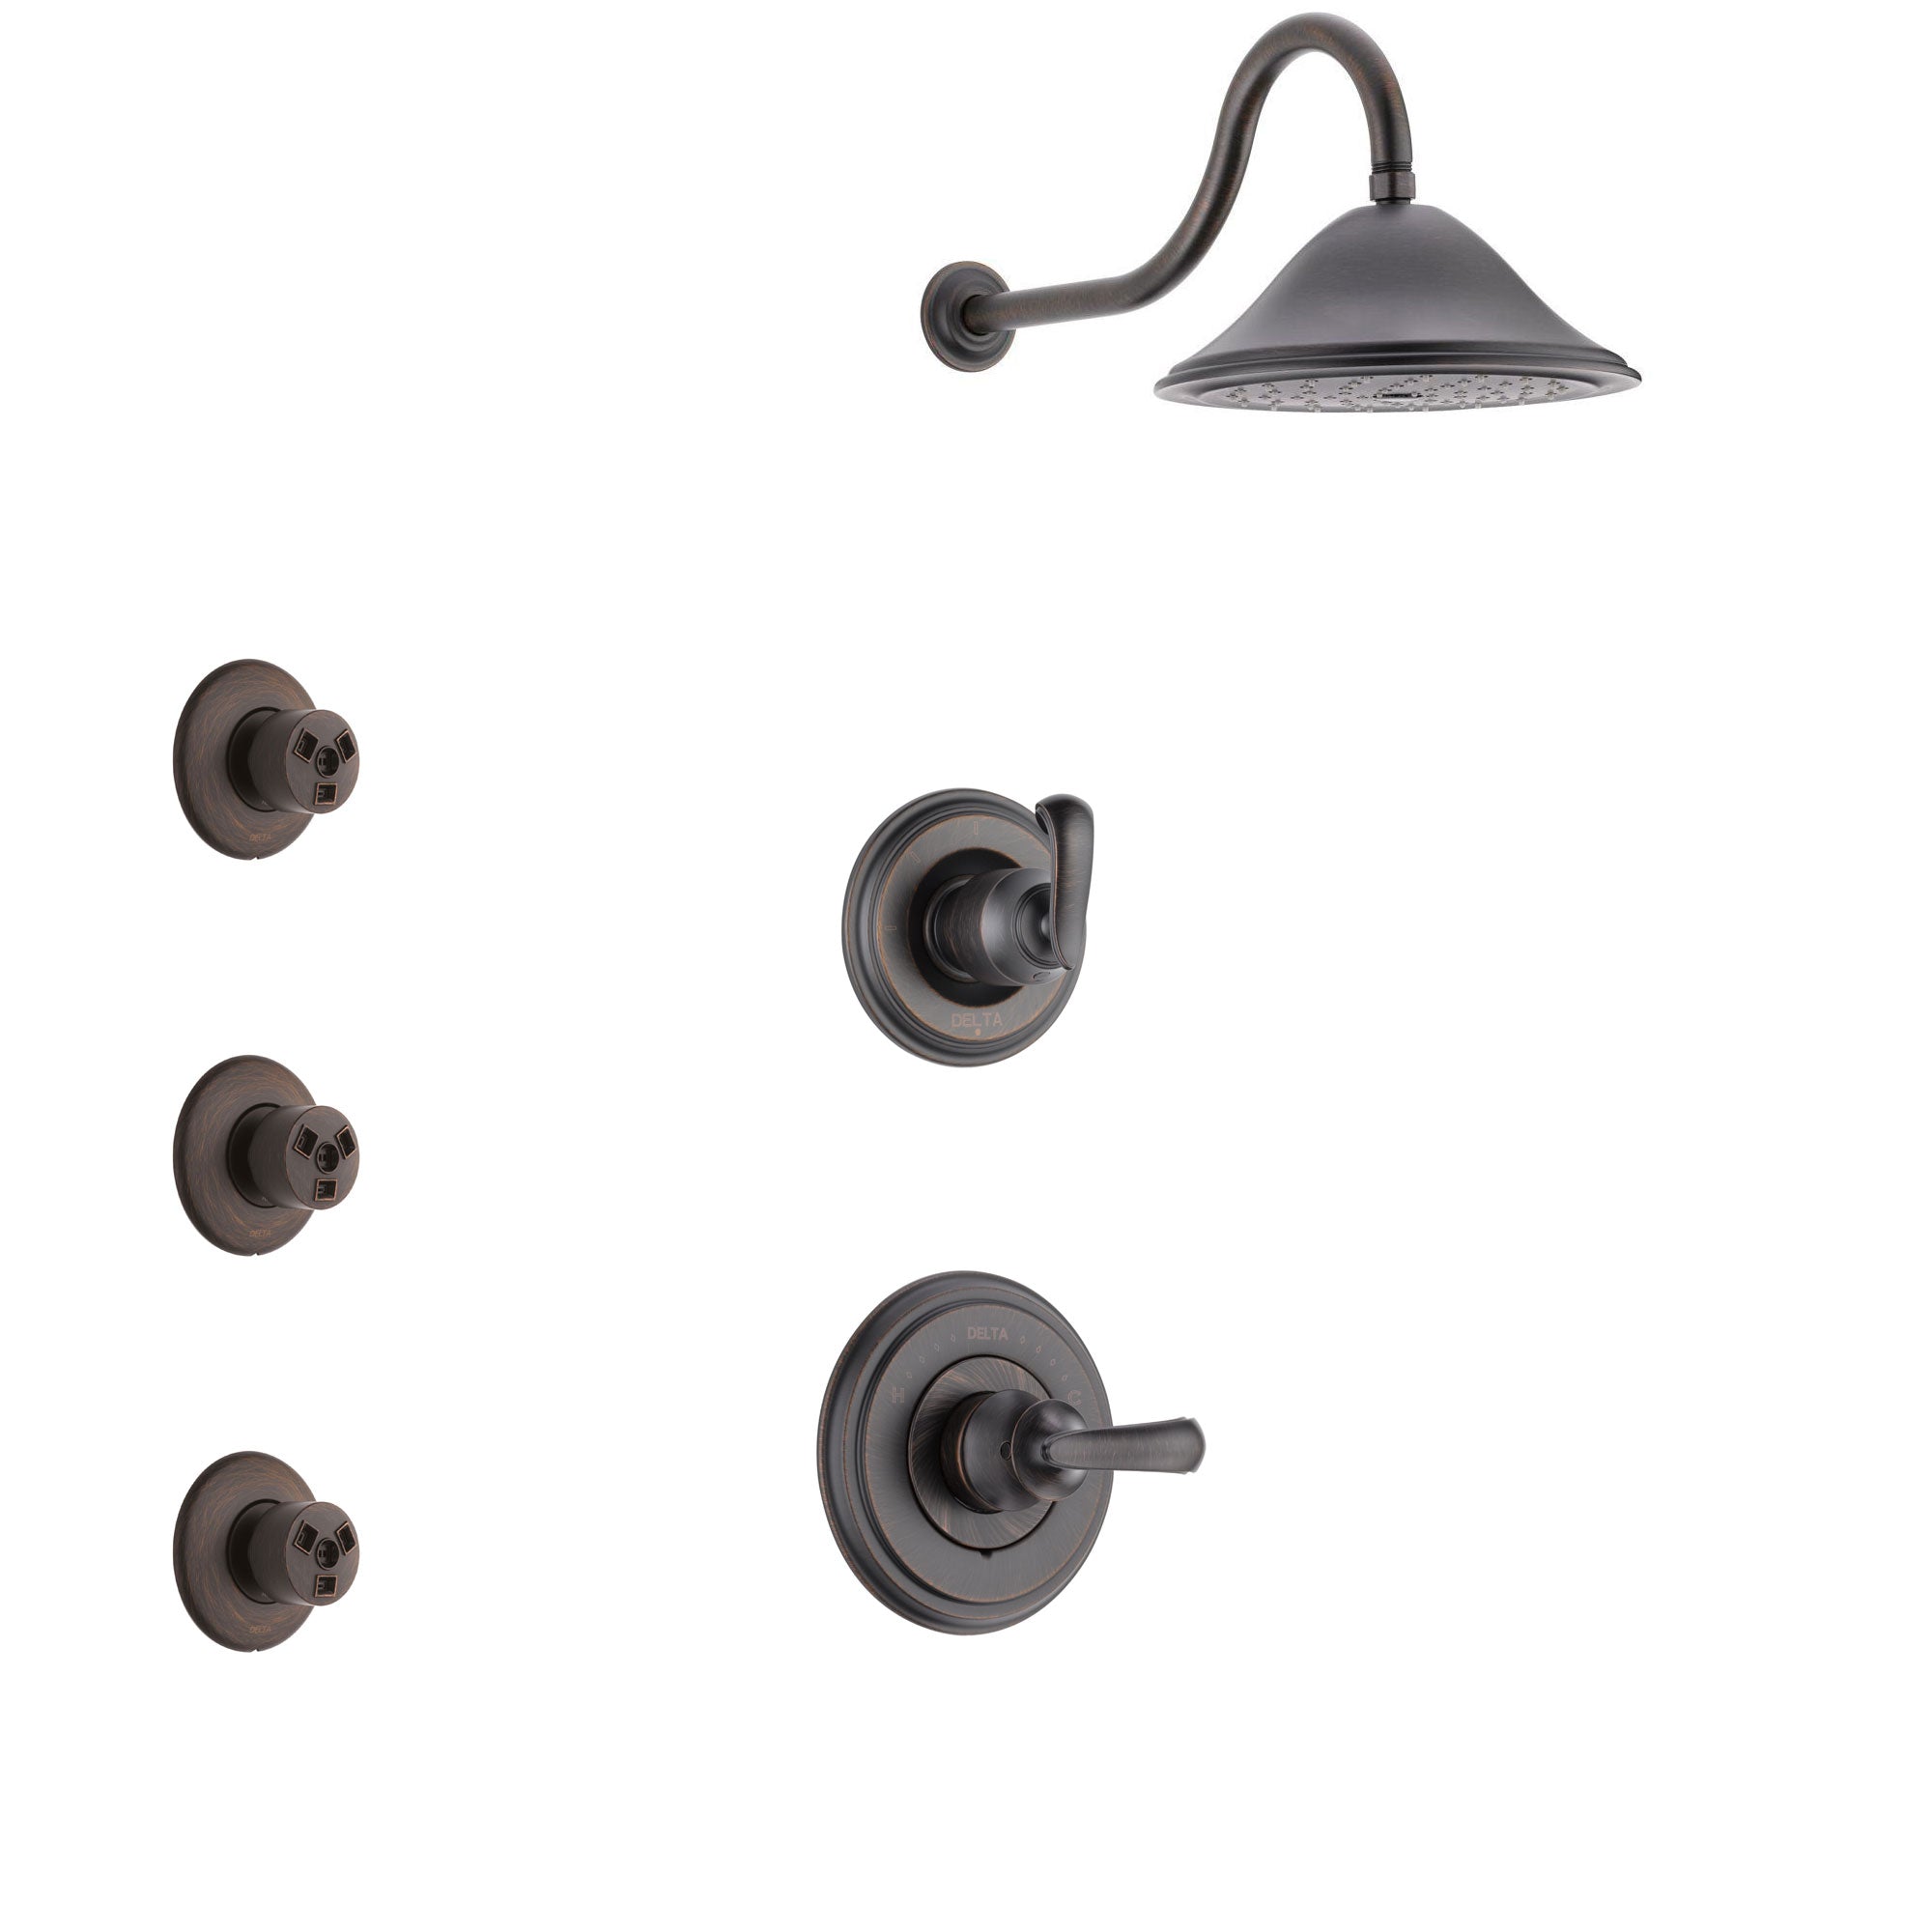 Delta Cassidy Venetian Bronze Finish Shower System with Control Handle, 3-Setting Diverter, Showerhead, and 3 Body Sprays SS14971RB4